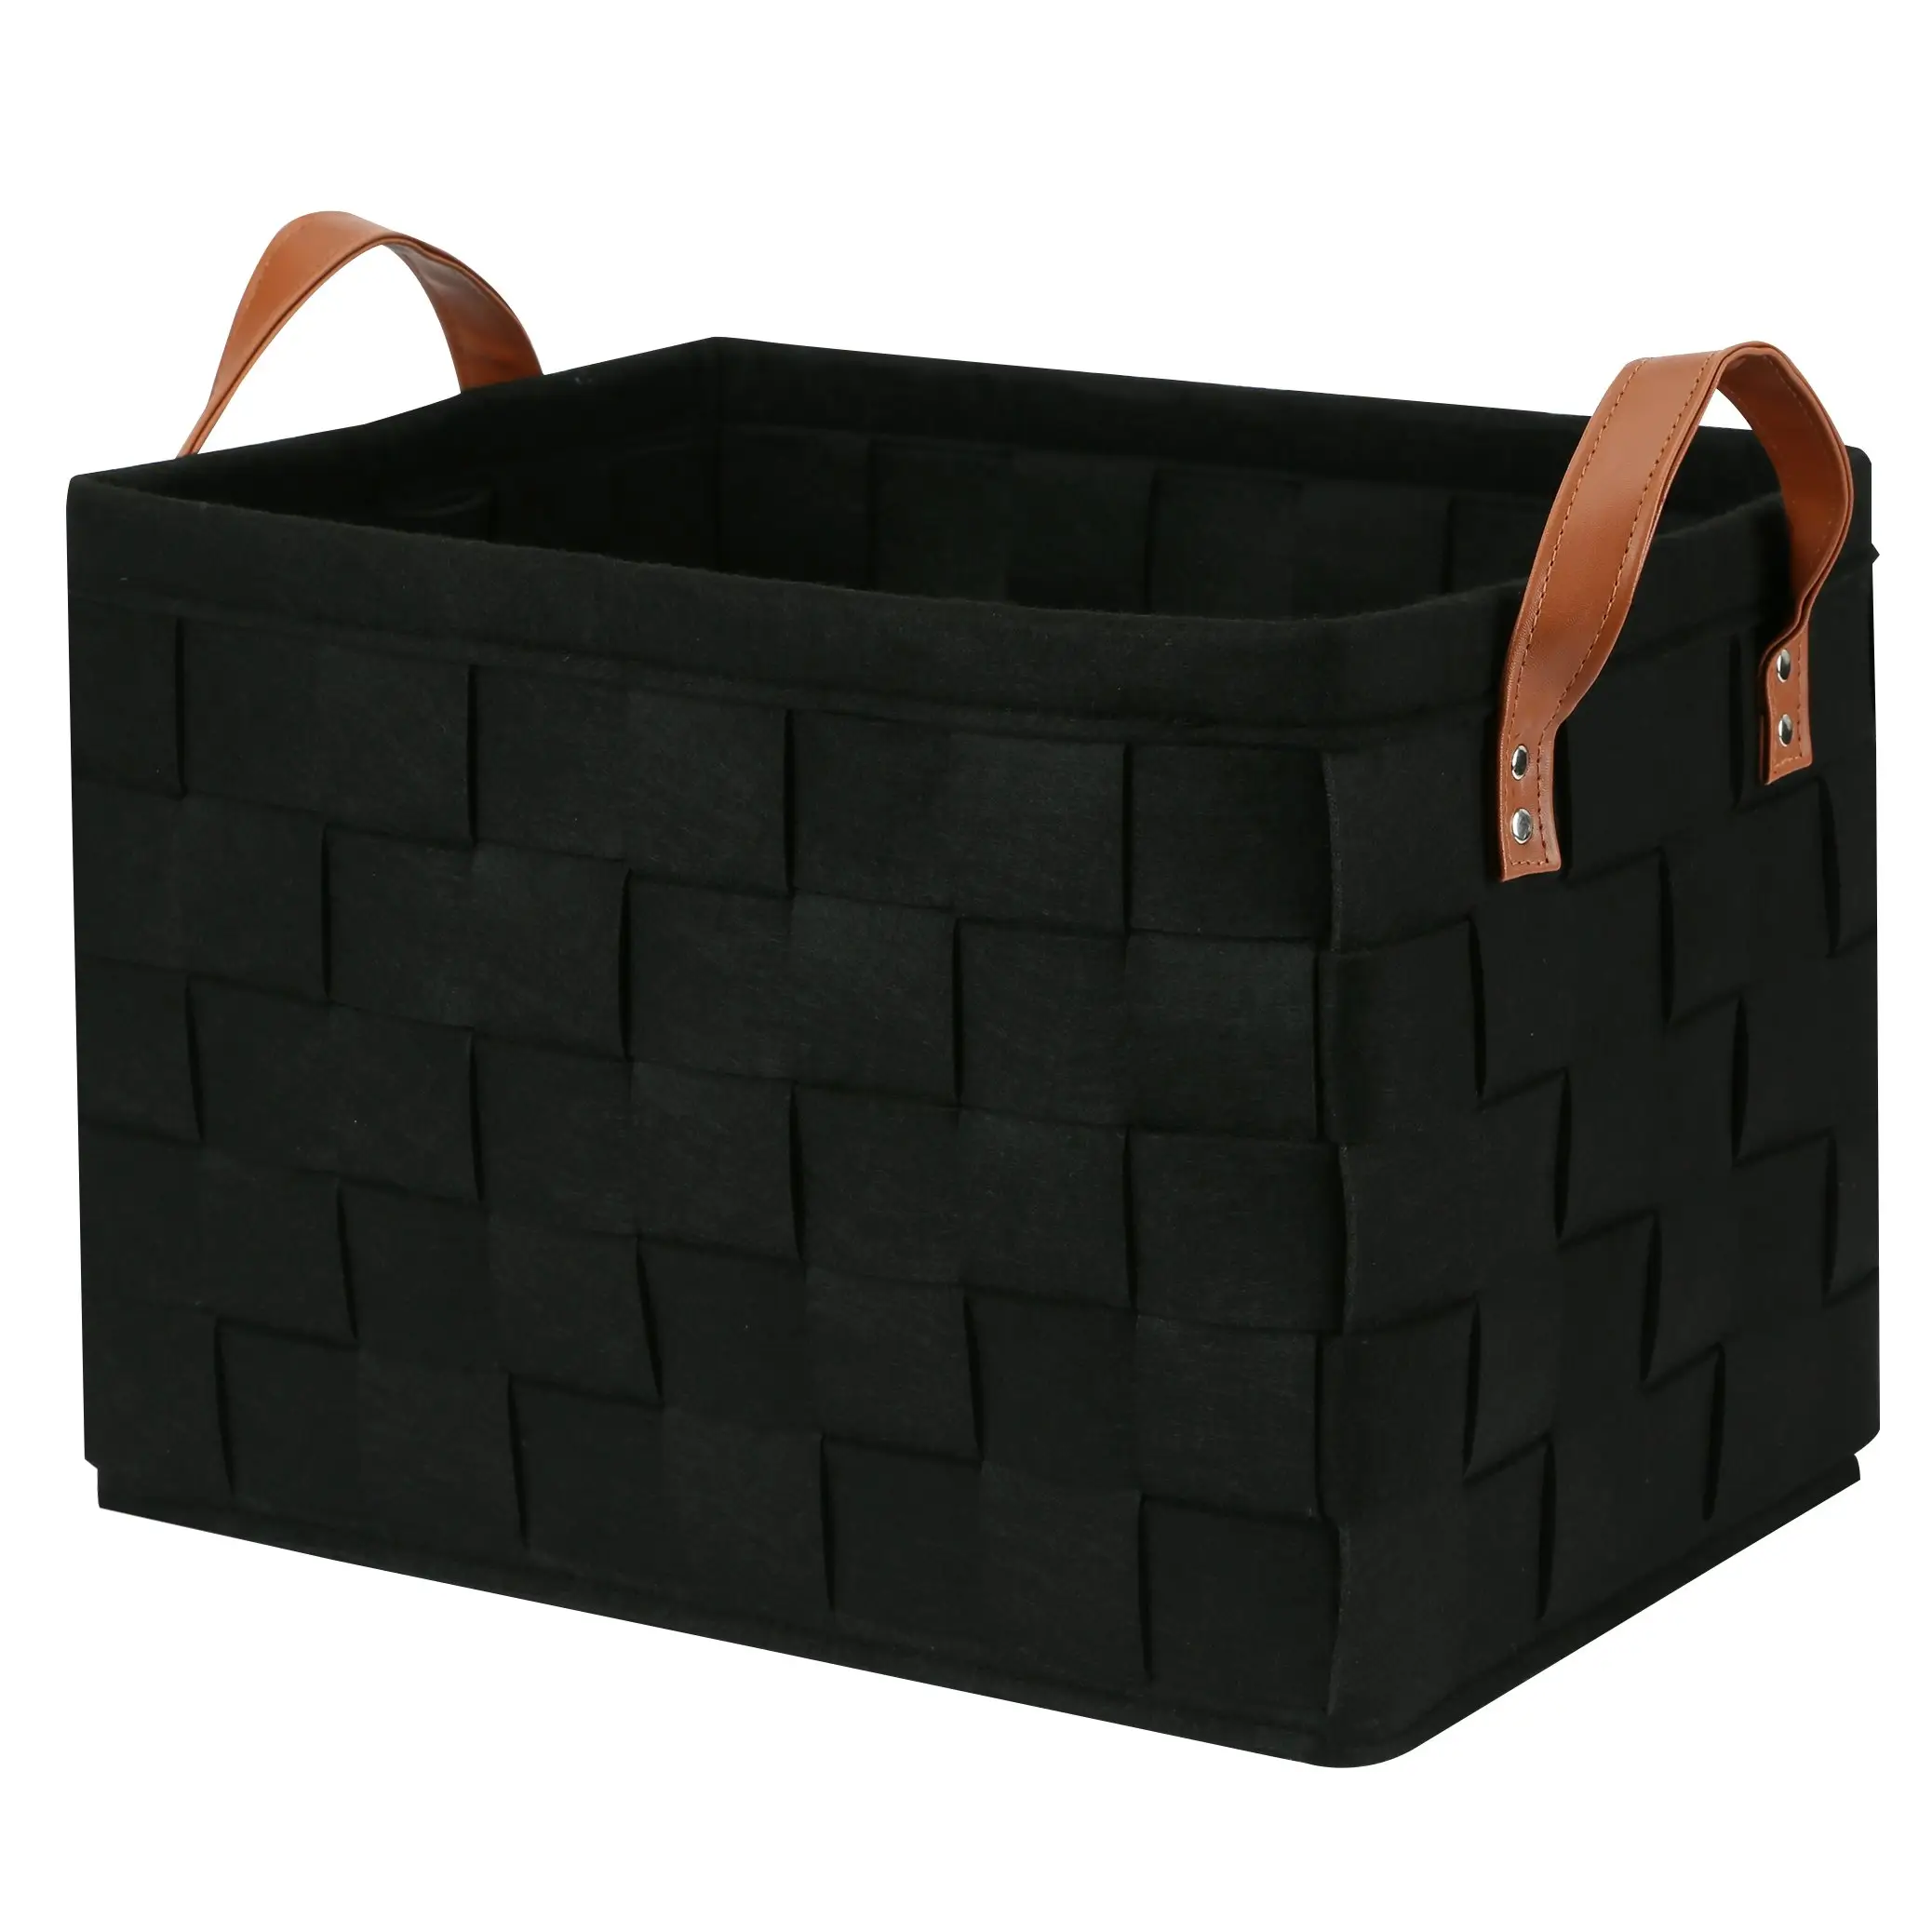 Collapsible rectangular leather handle large black hand woven storage basket for organizing